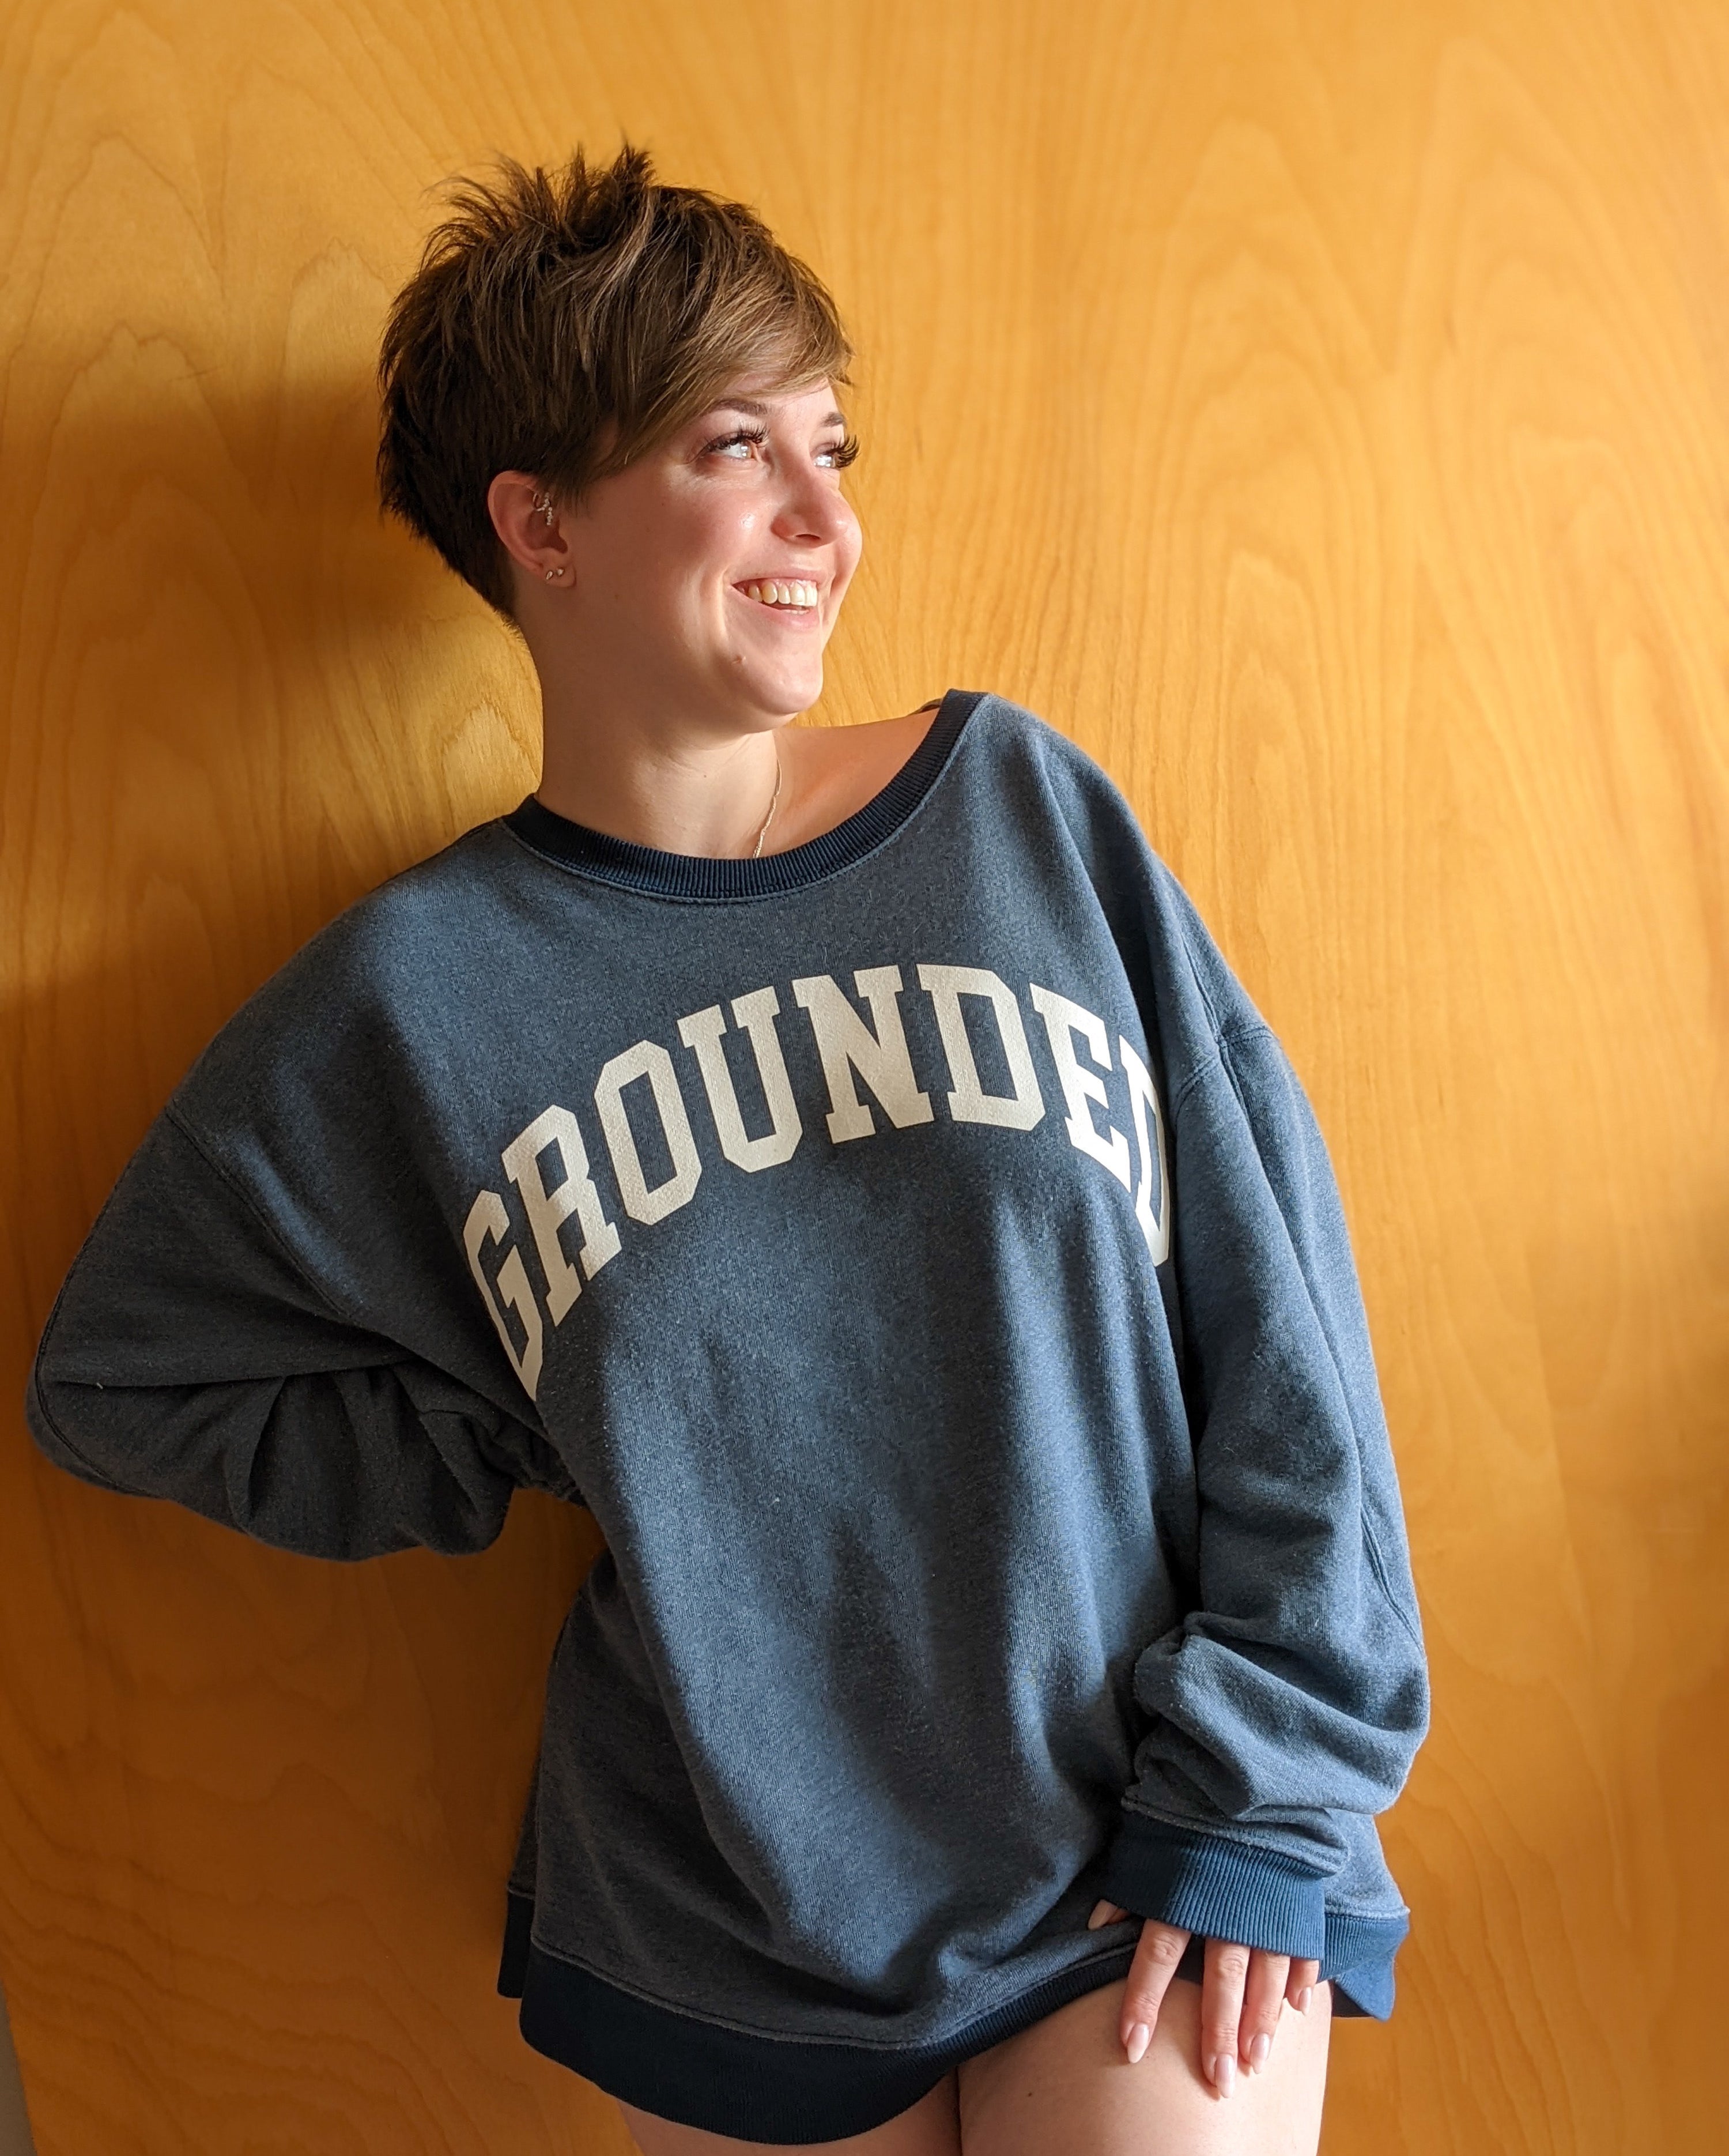 A person wearing the oversized vintage style sweatshirt with the word grounded on the front